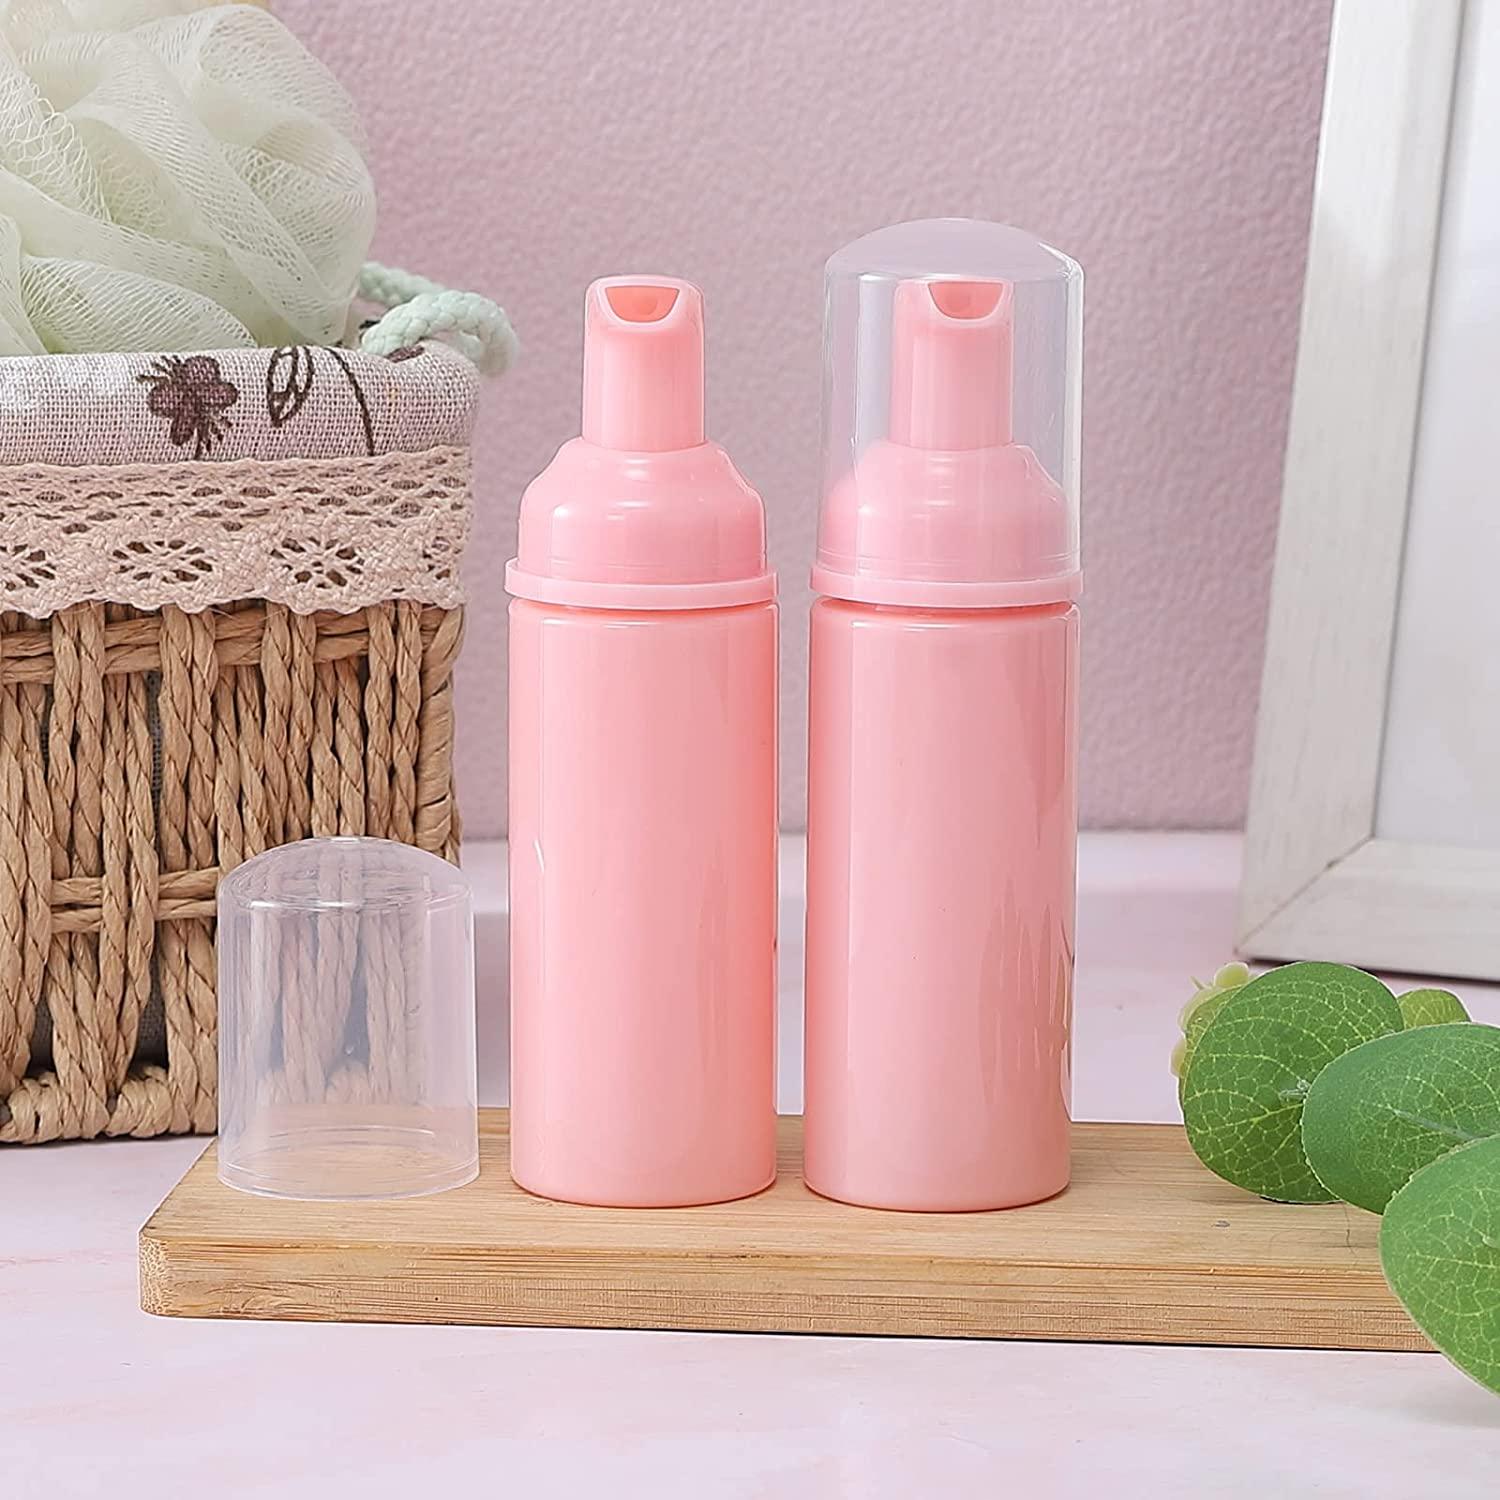  0.5 OZ Refillable Airless Pump Bottle, Travel Lotion Container,  Plastic Cosmetic Dispenser (6PCS,Rose Red) : Beauty & Personal Care